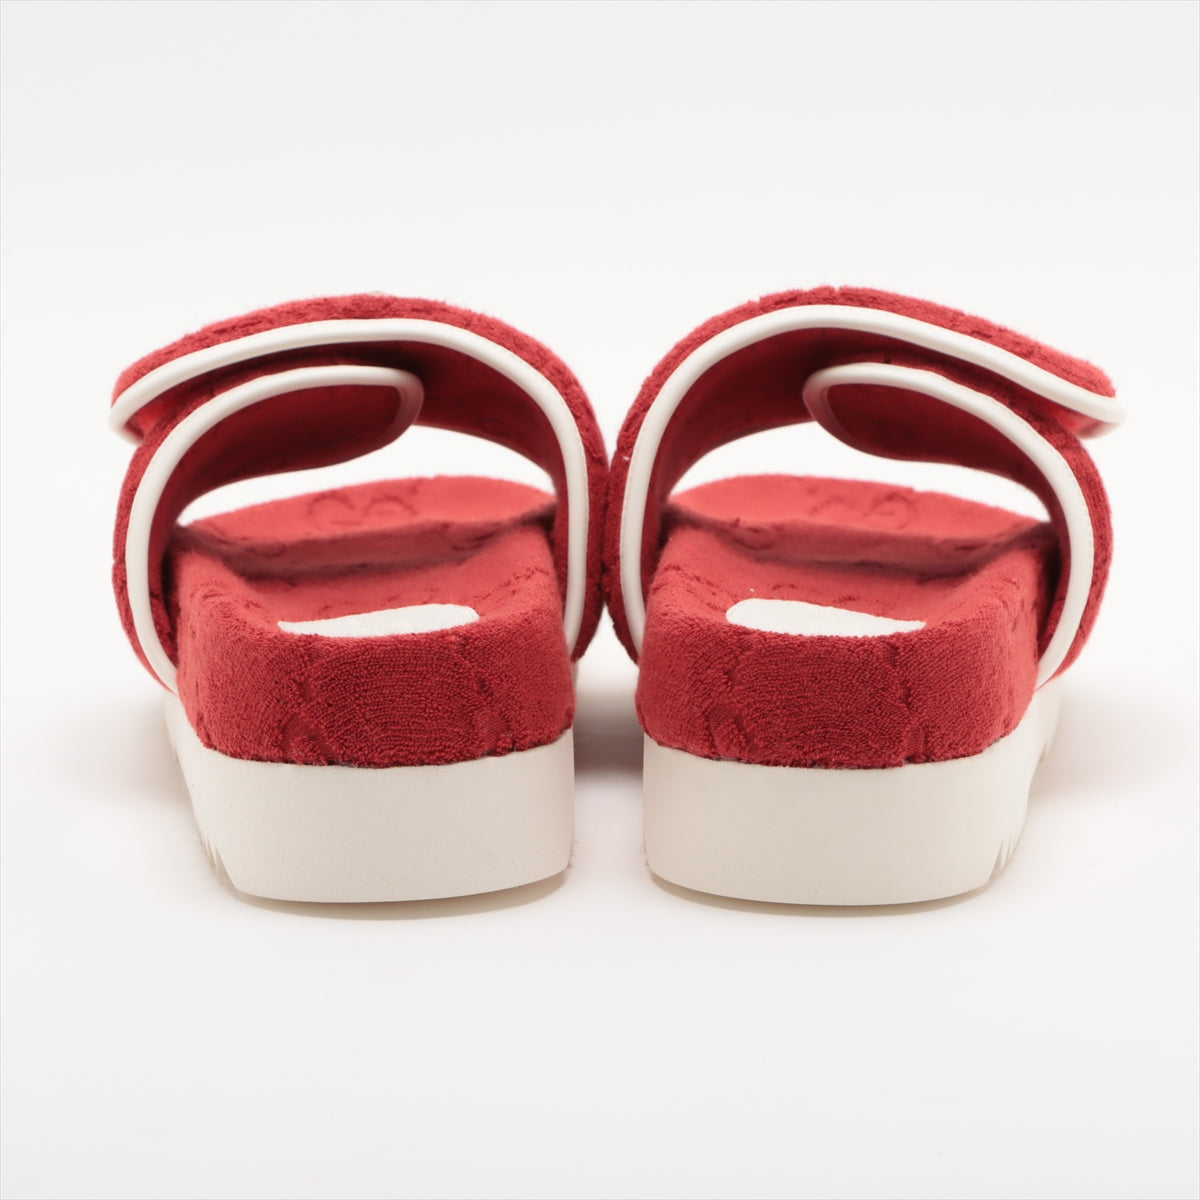 Gucci x adidas Cotton Sandals US9 Men's Red box There is a bag